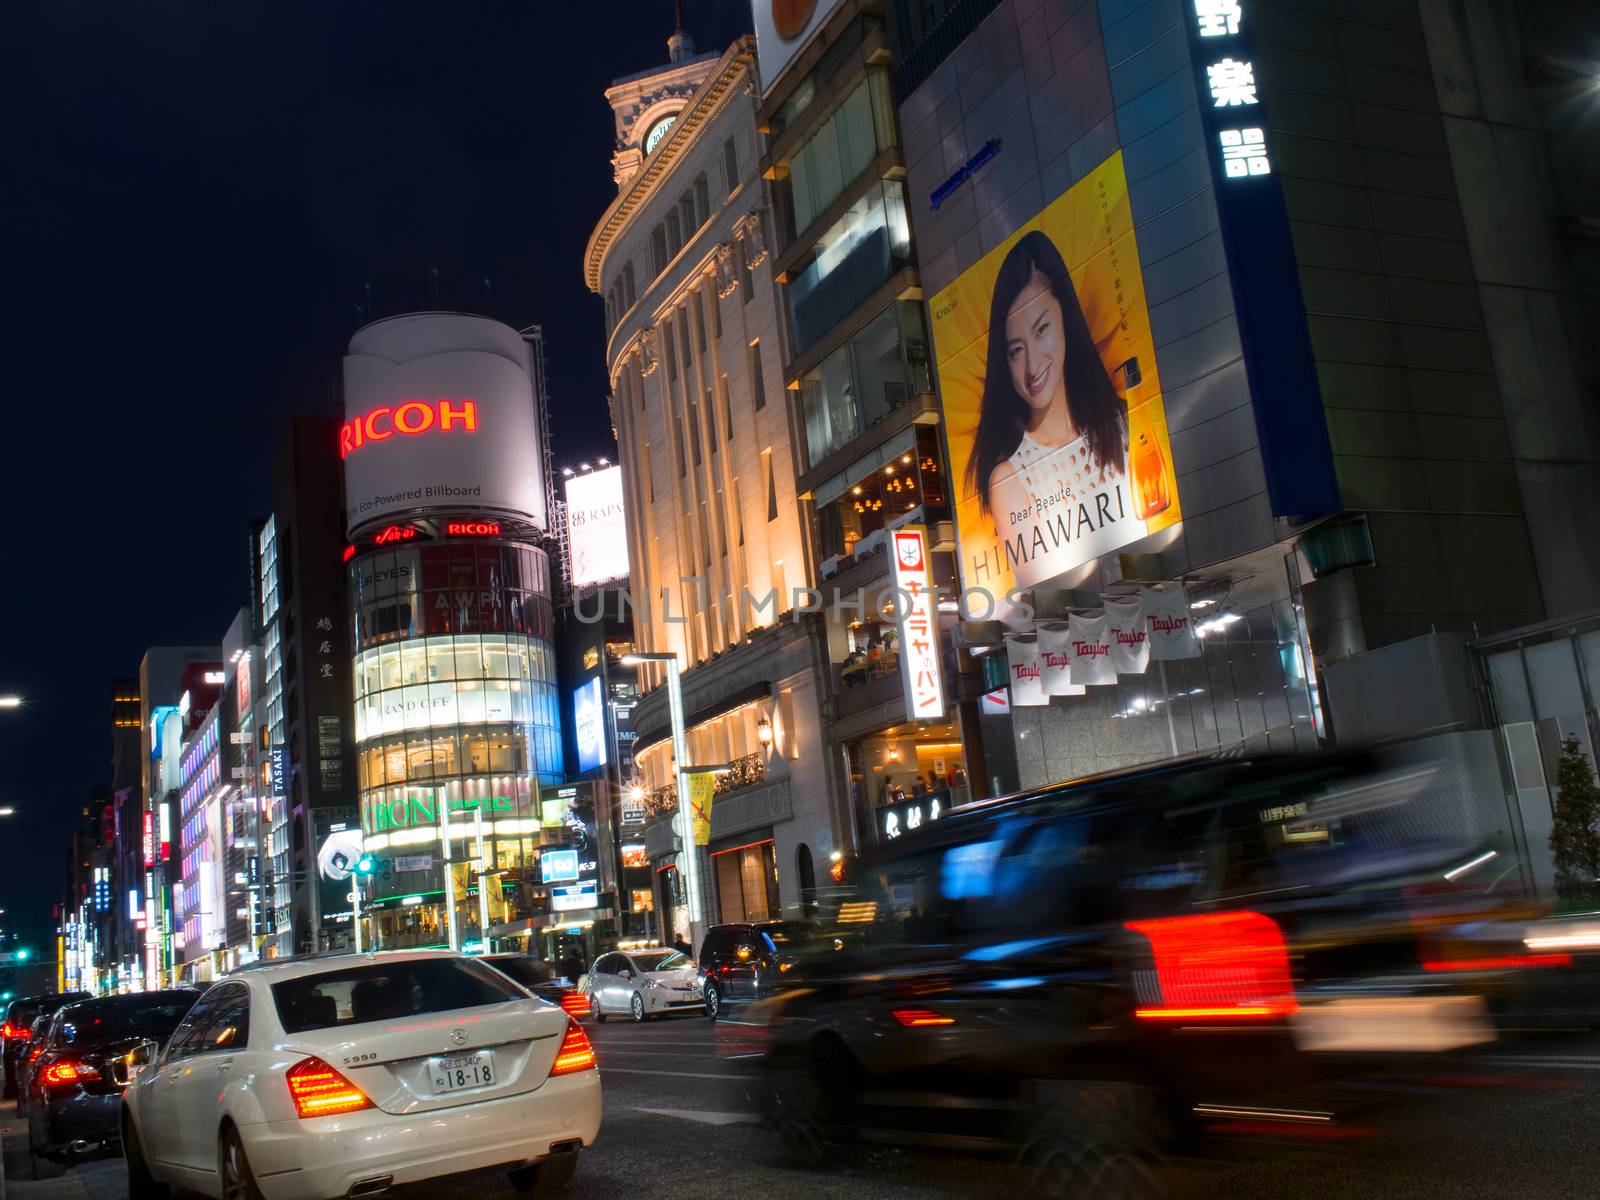 ginza shopping district in tokyo japan by zkruger